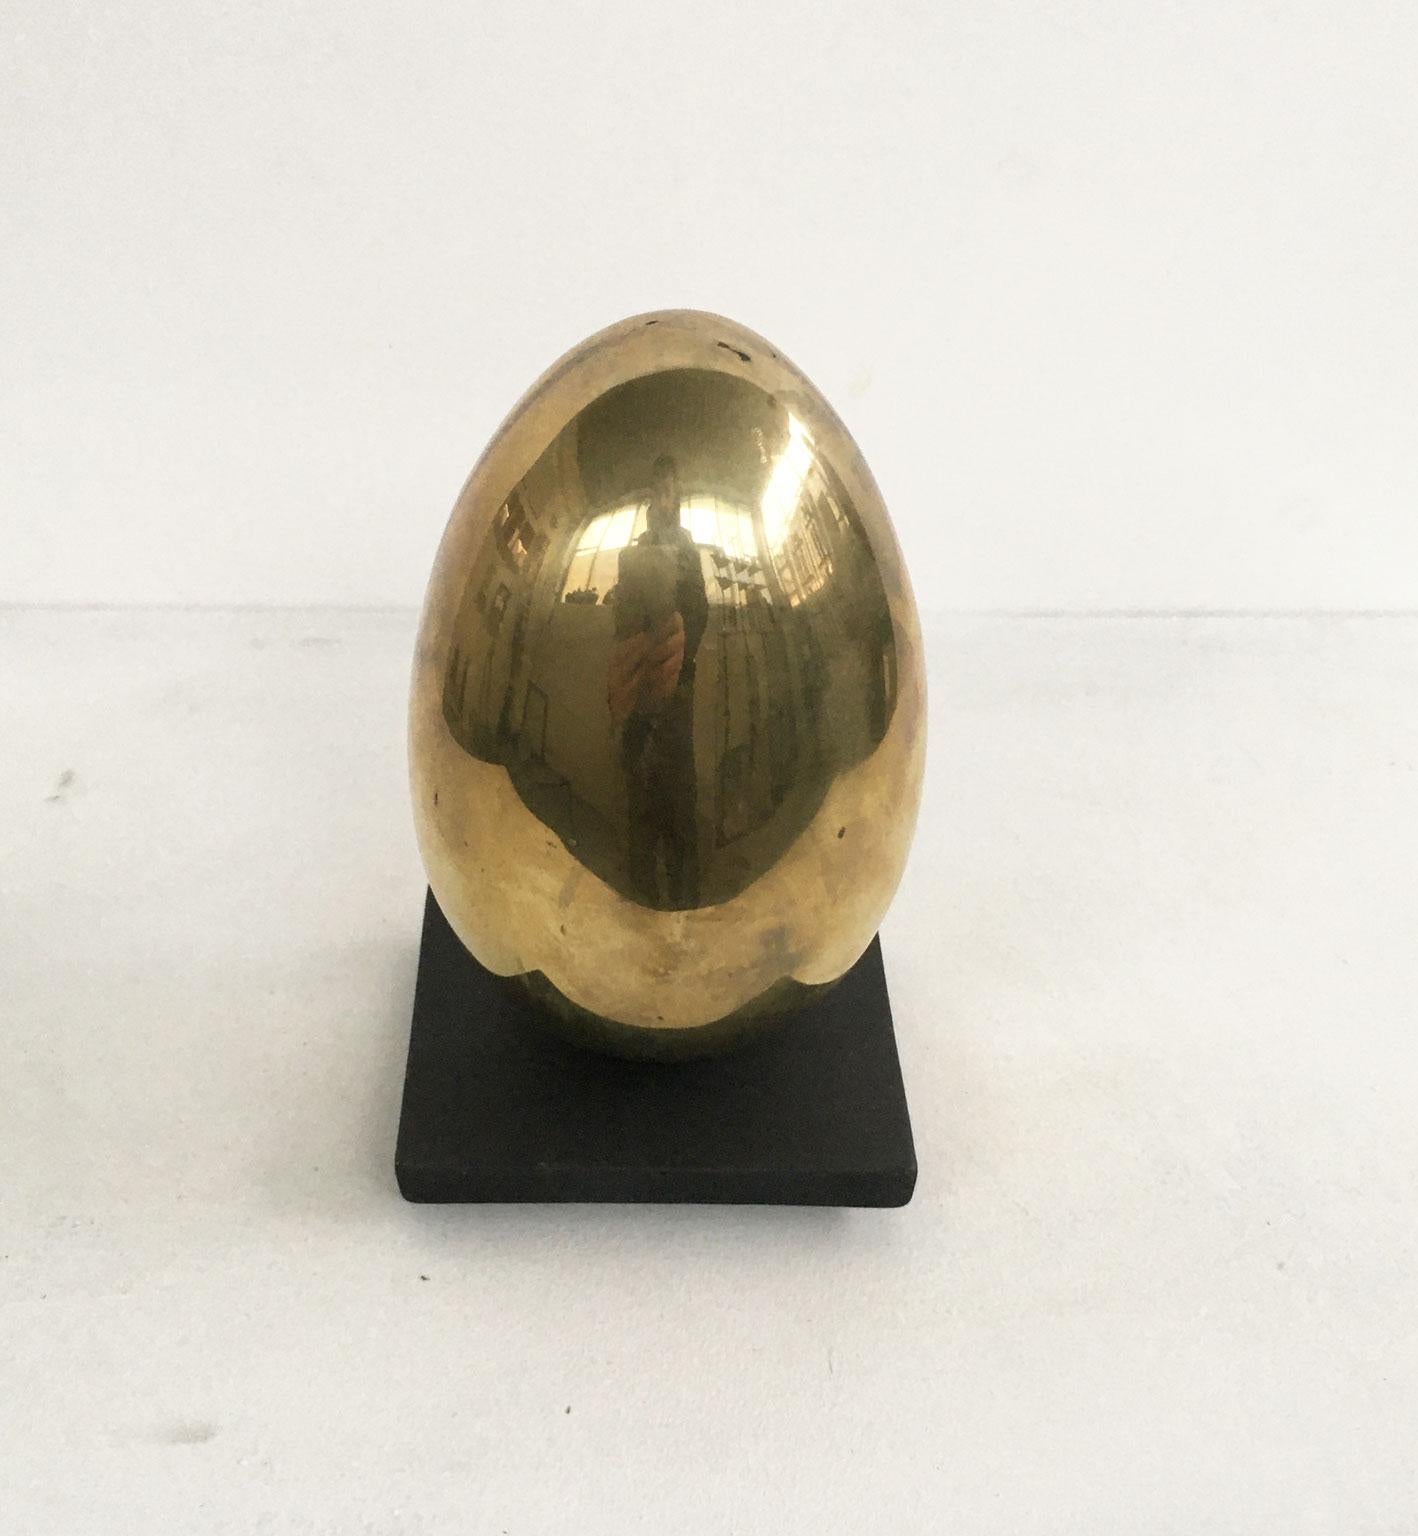 1978 Italy Bronze Abstract Sculpture by Fanna Roncoroni Forma Ovale Oval Shape For Sale 6